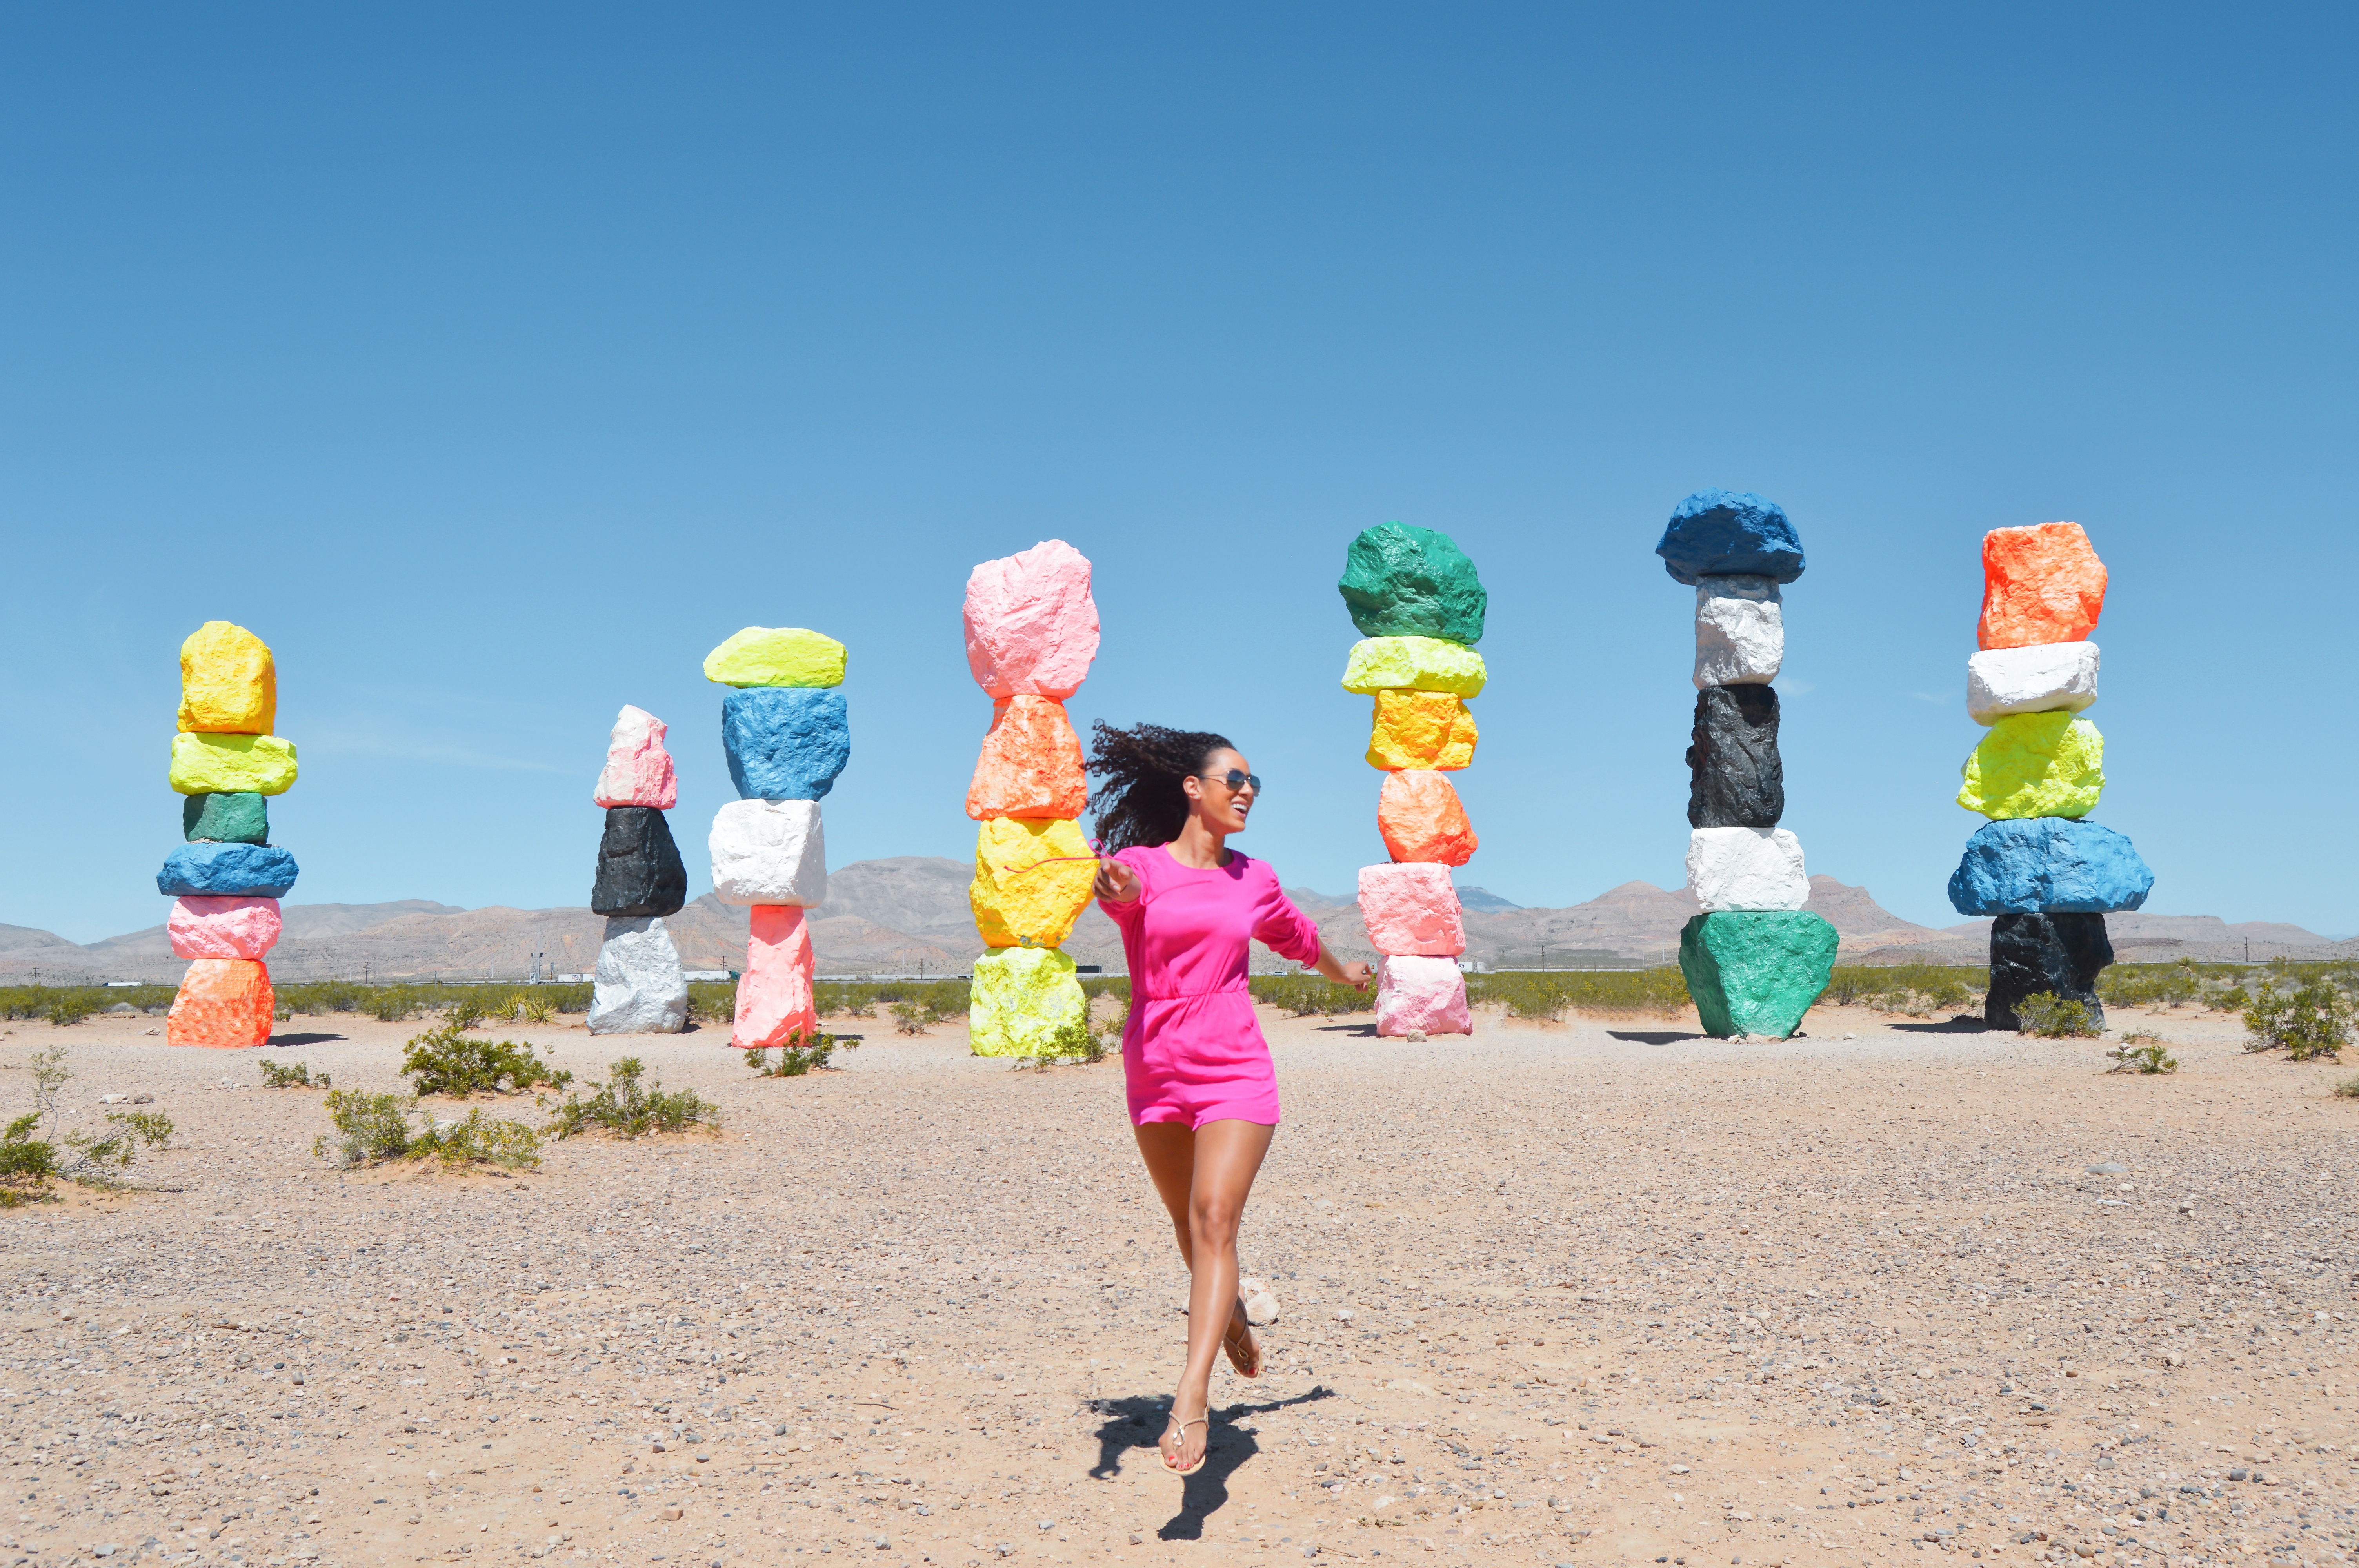 Jumping at the Seven Magic Mountains in Las Vegas